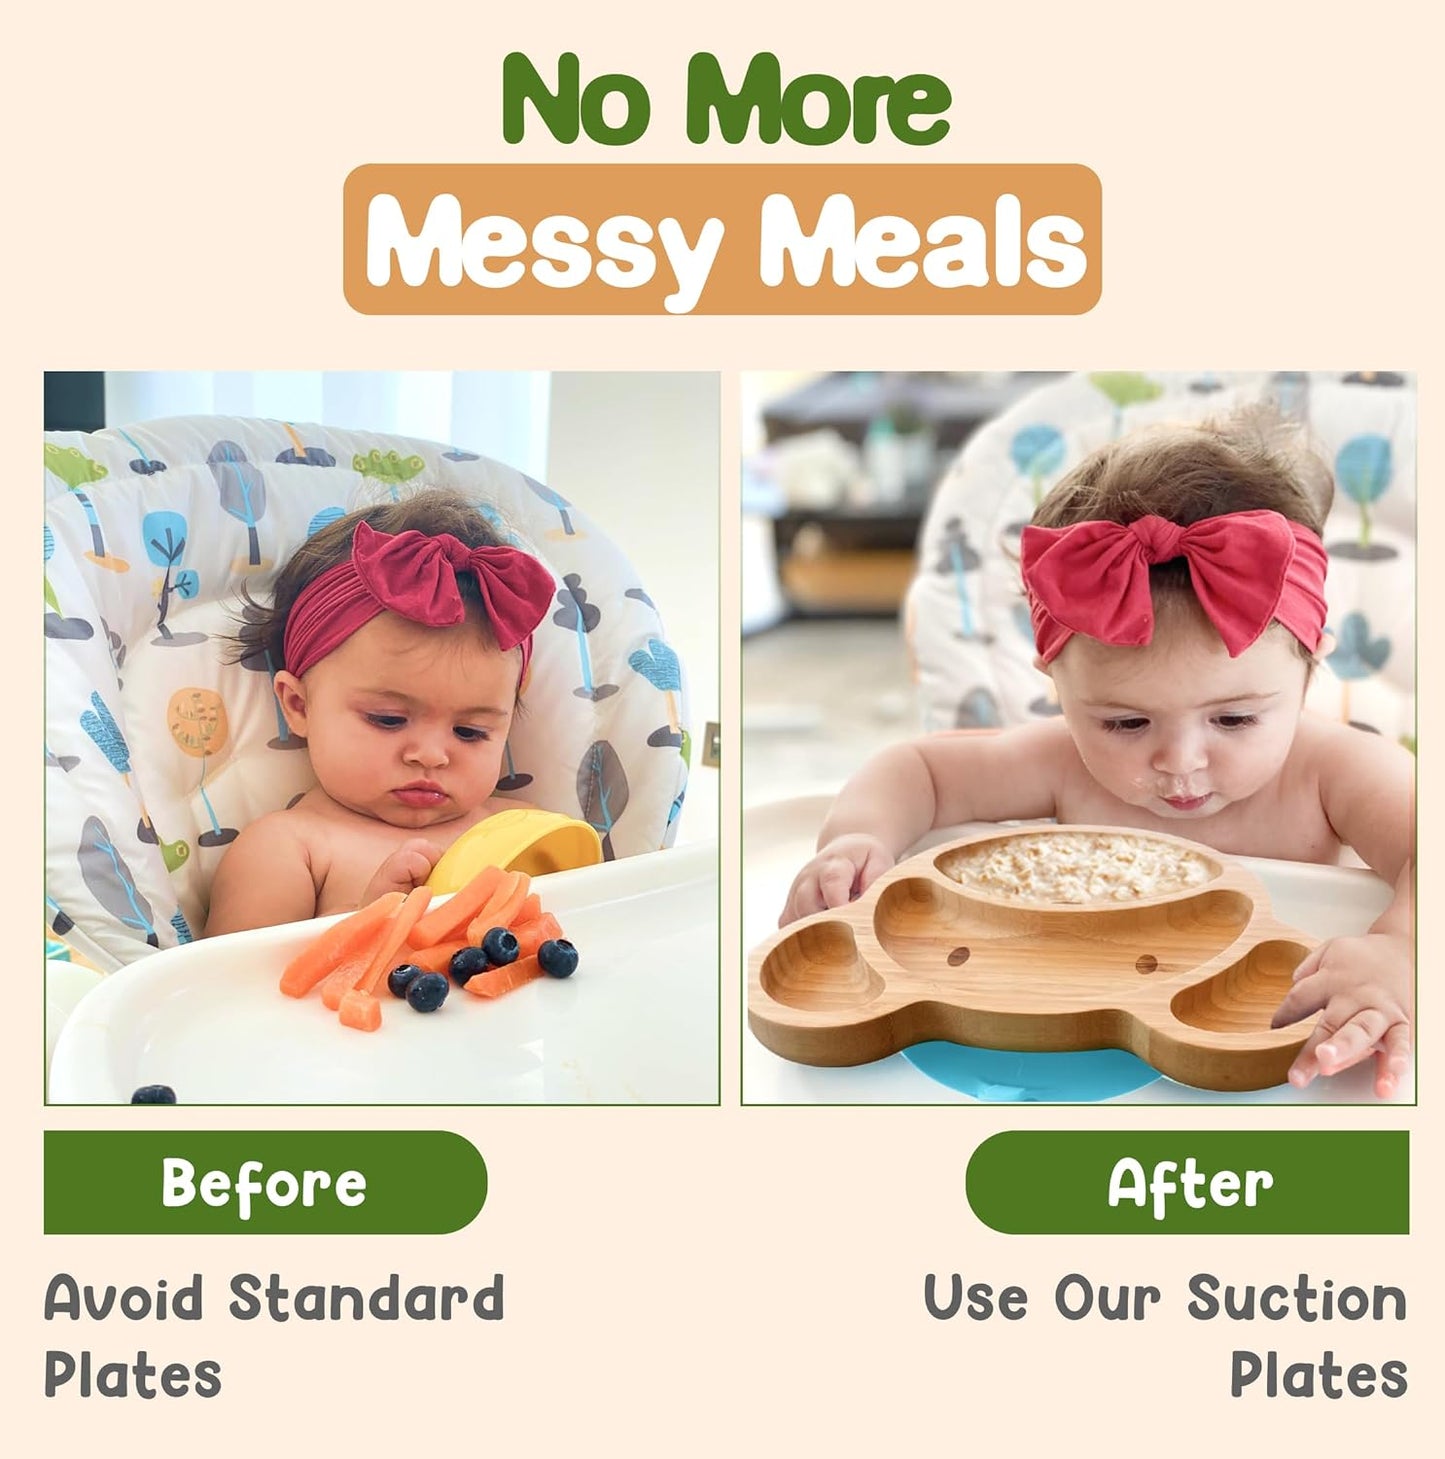 Bamboo Plates For Kids | Baby and Toddler Bamboo Suction Plate for Babies Feeding and Weaning | Promotes Self-Feeding with Eco-Friendly Sturdy Bear Design | Suction Plates for Busy Moms & Dads | Blue